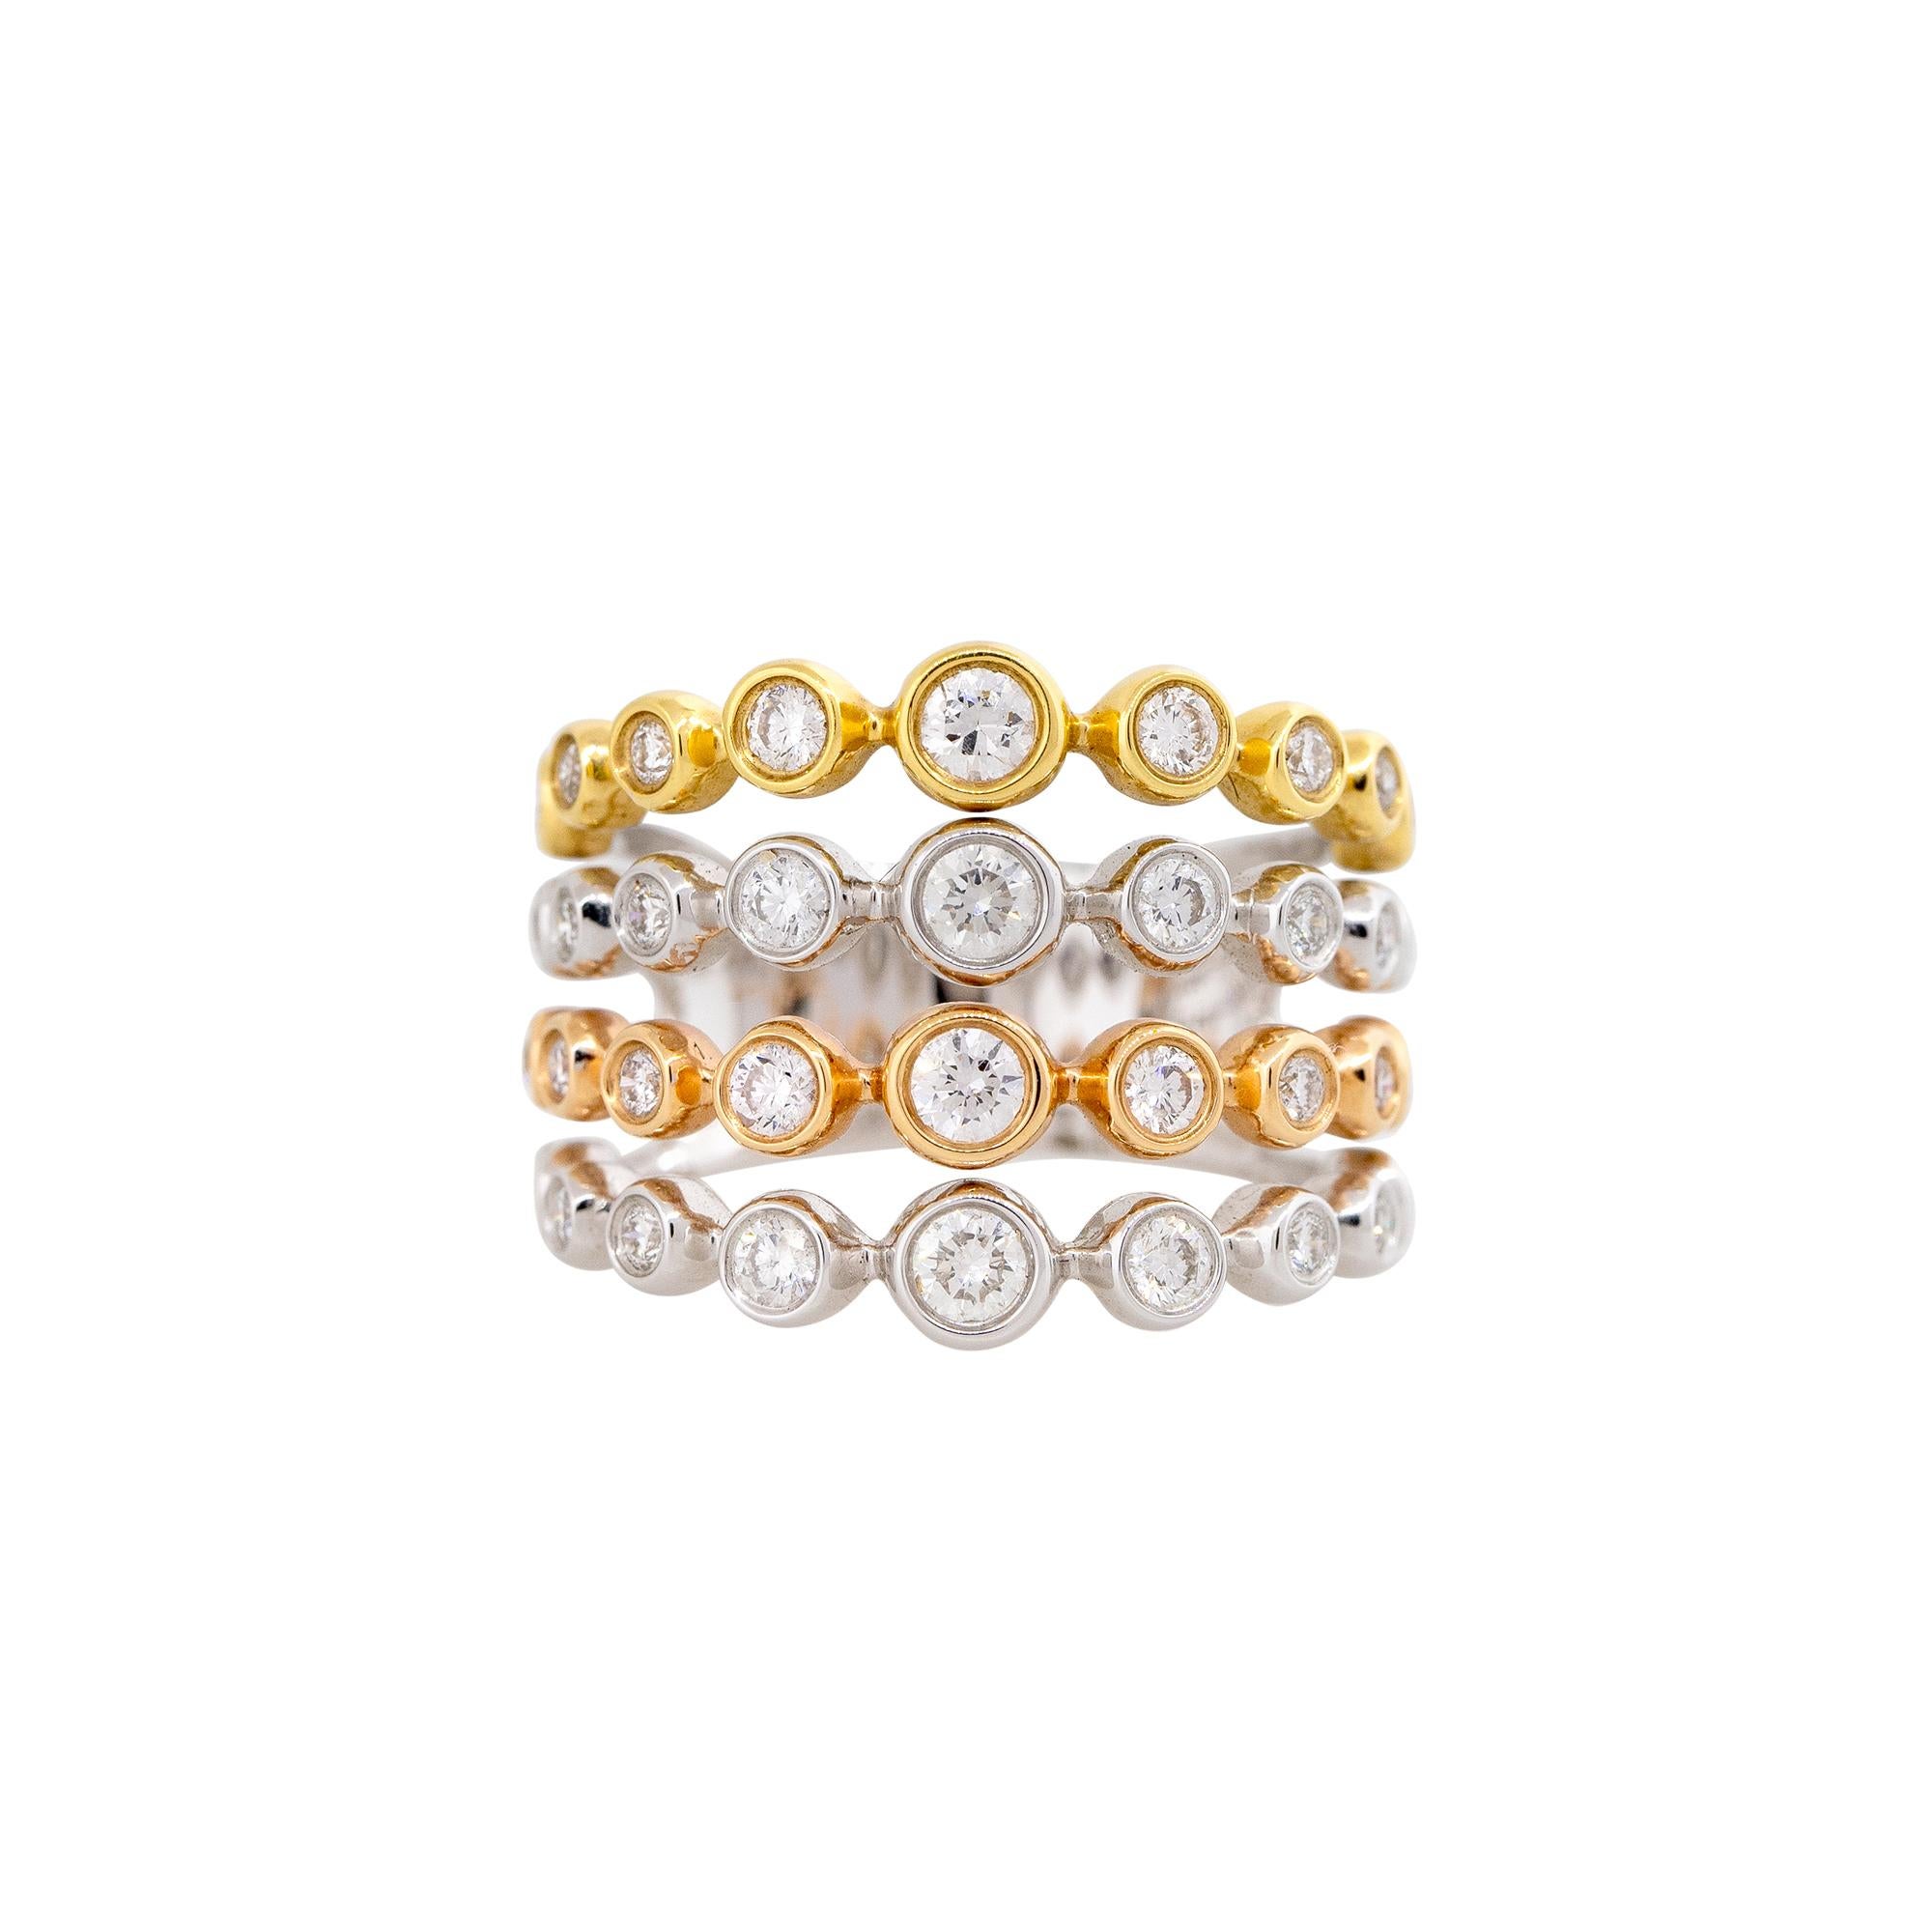 18k Tri-Color Gold 1.03ctw Diamond 4-Row Bezel Set Ring

Product: 4-Row Bezel Set Diamond Ring
Material: 18k White Gold, 18k Rose Gold, 18k Yellow Gold
Diamond Details: There are approximately 1.03 carats of Round Brilliant cut diamonds, all bezel